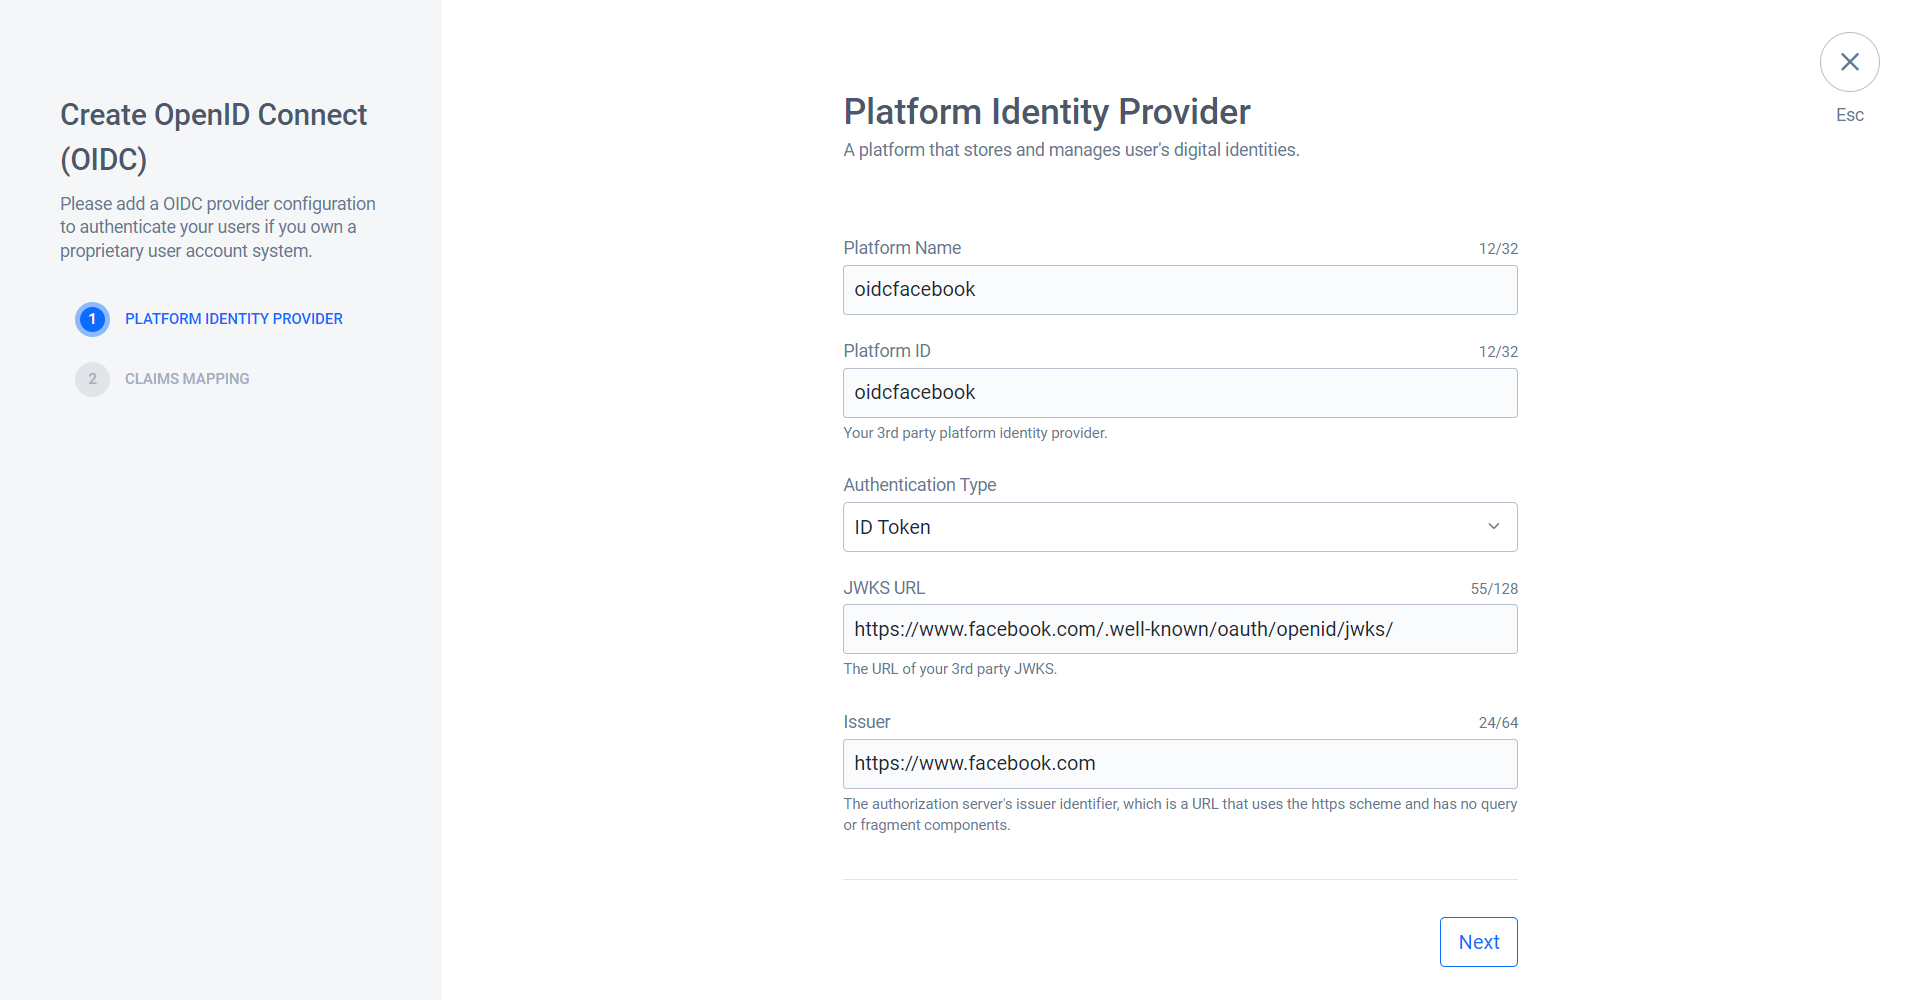 Image shows the Create Open ID (OIDC) form